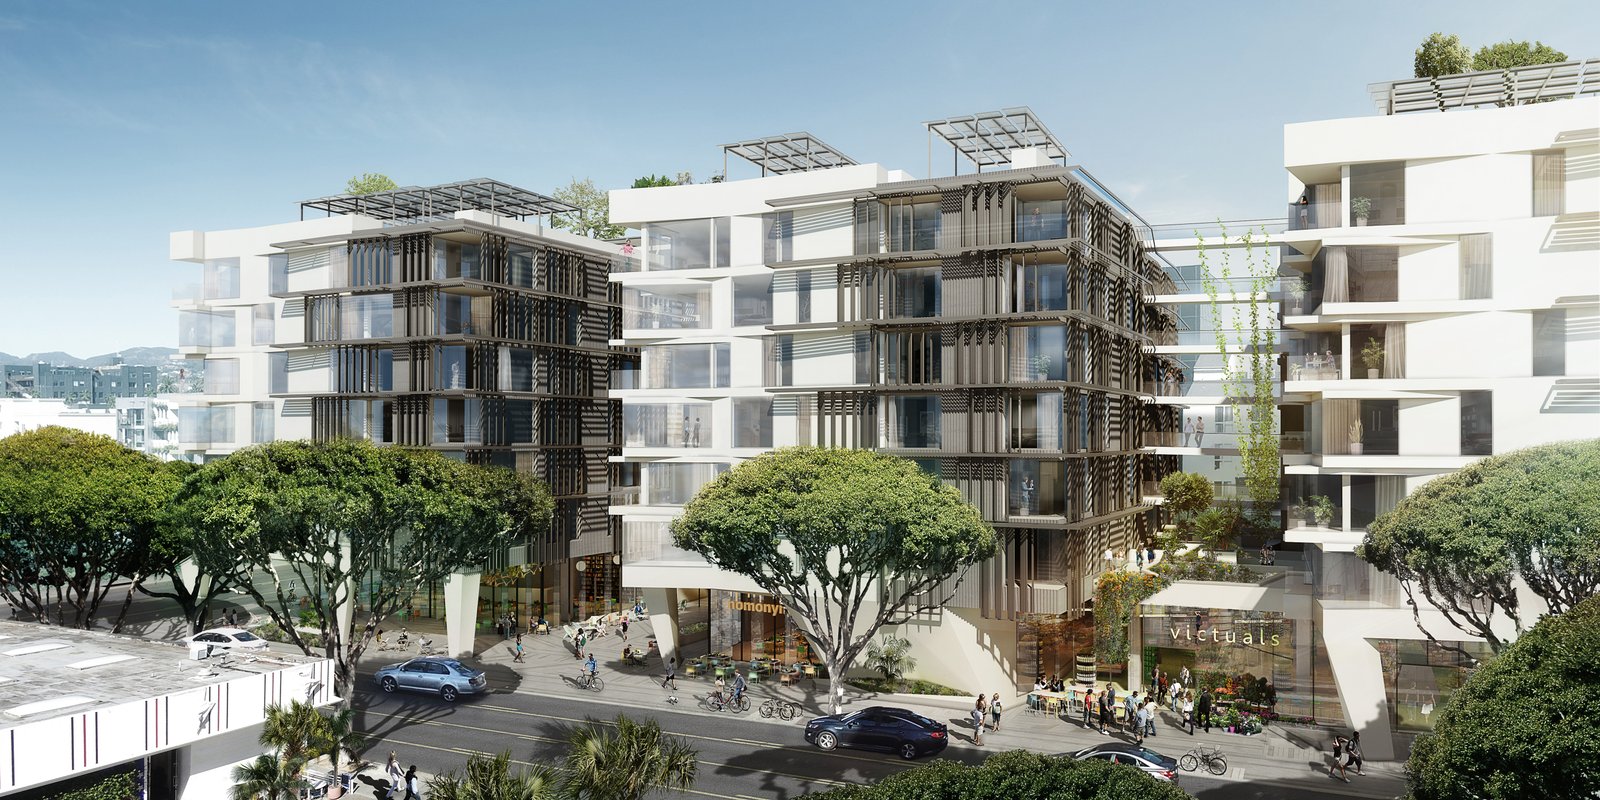 500 Broadway (pictured here) and its sister project, the 100 percent affordable 1626 Lincoln Blvd. project, were both approved this week. All renderings courtesy of Koning Eizenberg Architects.